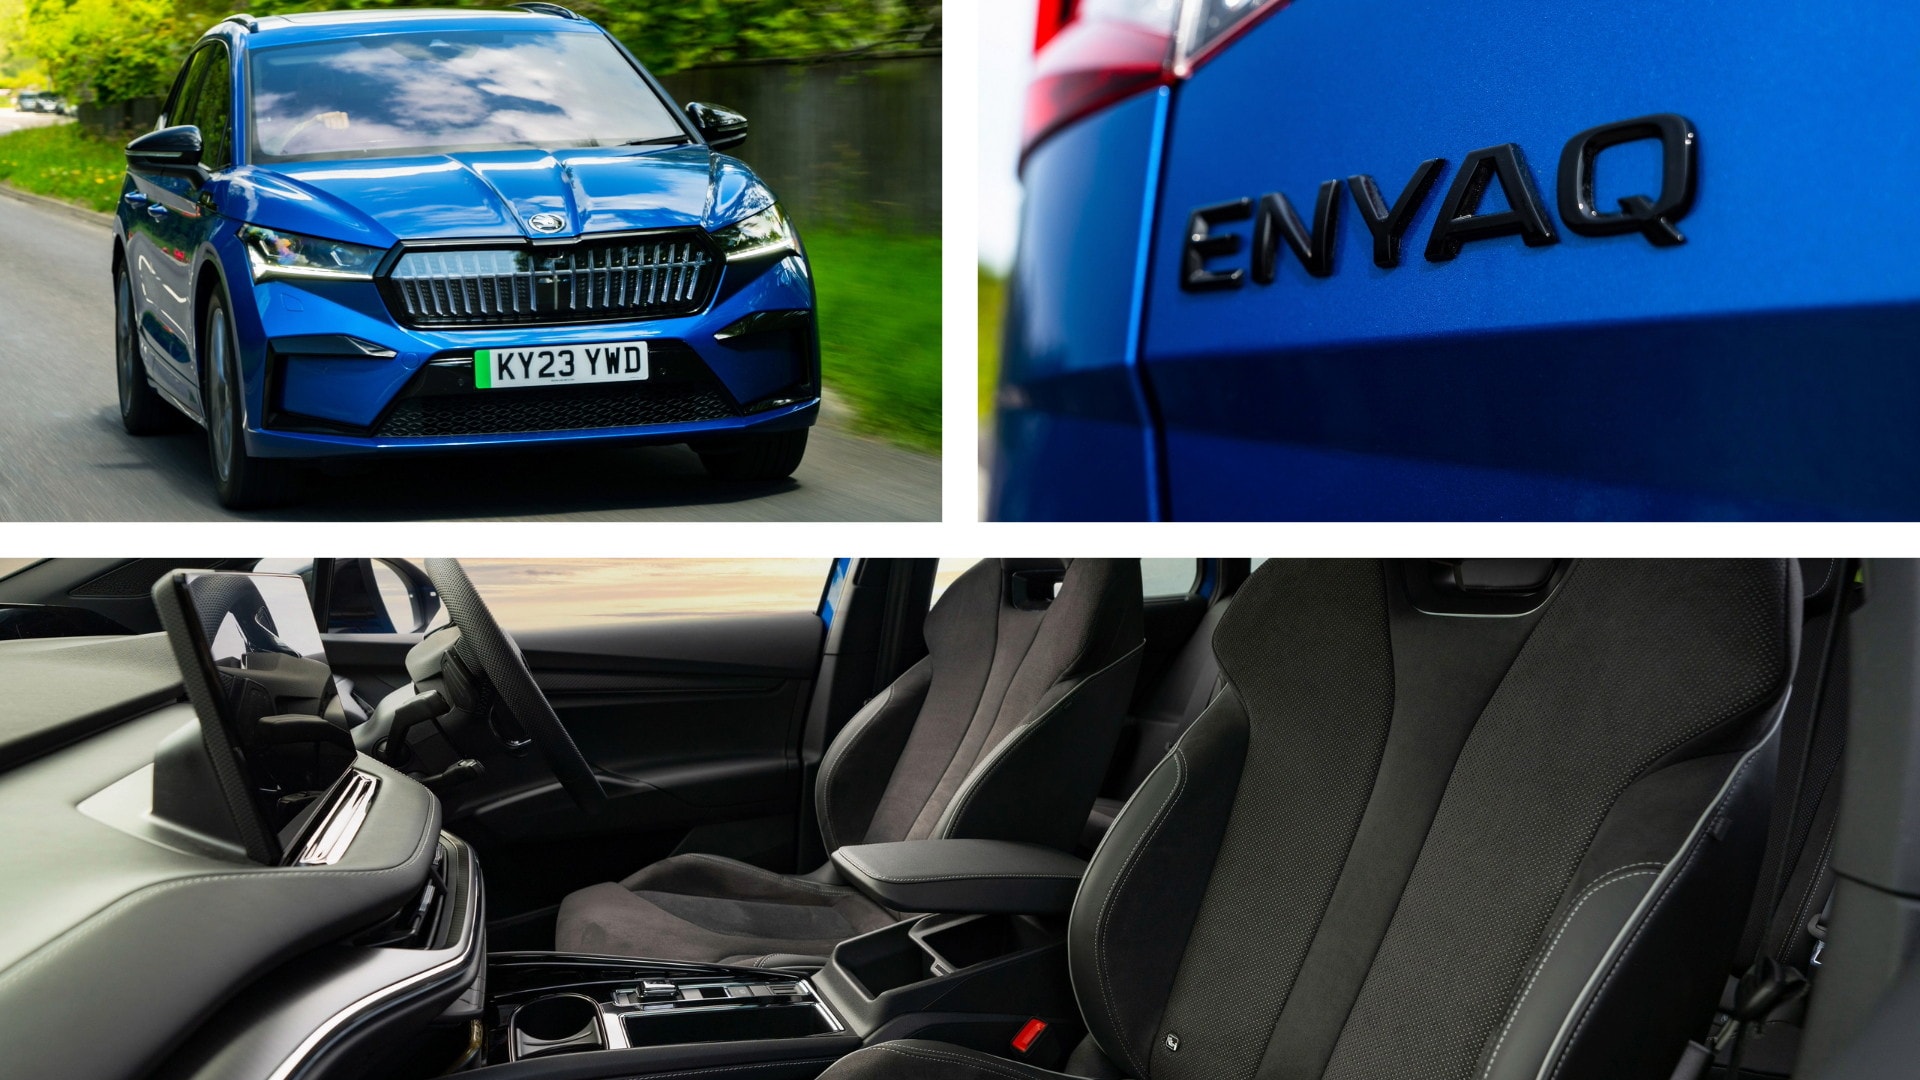 https://s1.cdn.autoevolution.com/images/news/skoda-has-made-the-2024-enyaq-so-good-you-may-want-it-over-its-vw-id4-cousin-222654_1.jpg